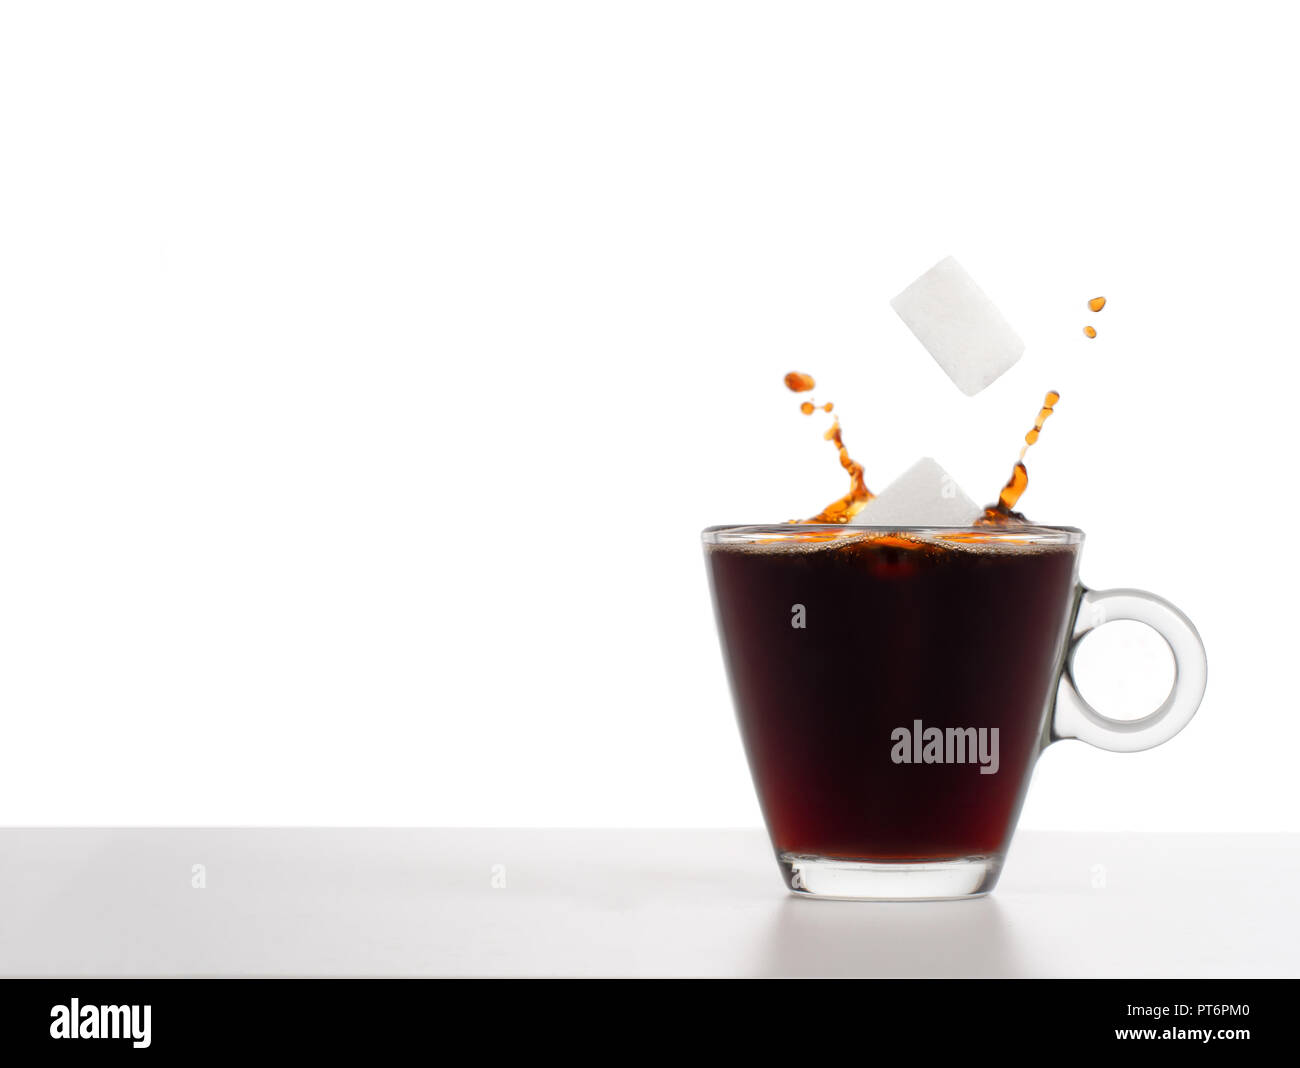 Sugar cubes falling into coffee with splash, health concept. Plain background for copyspace. Glass cup. Stock Photo